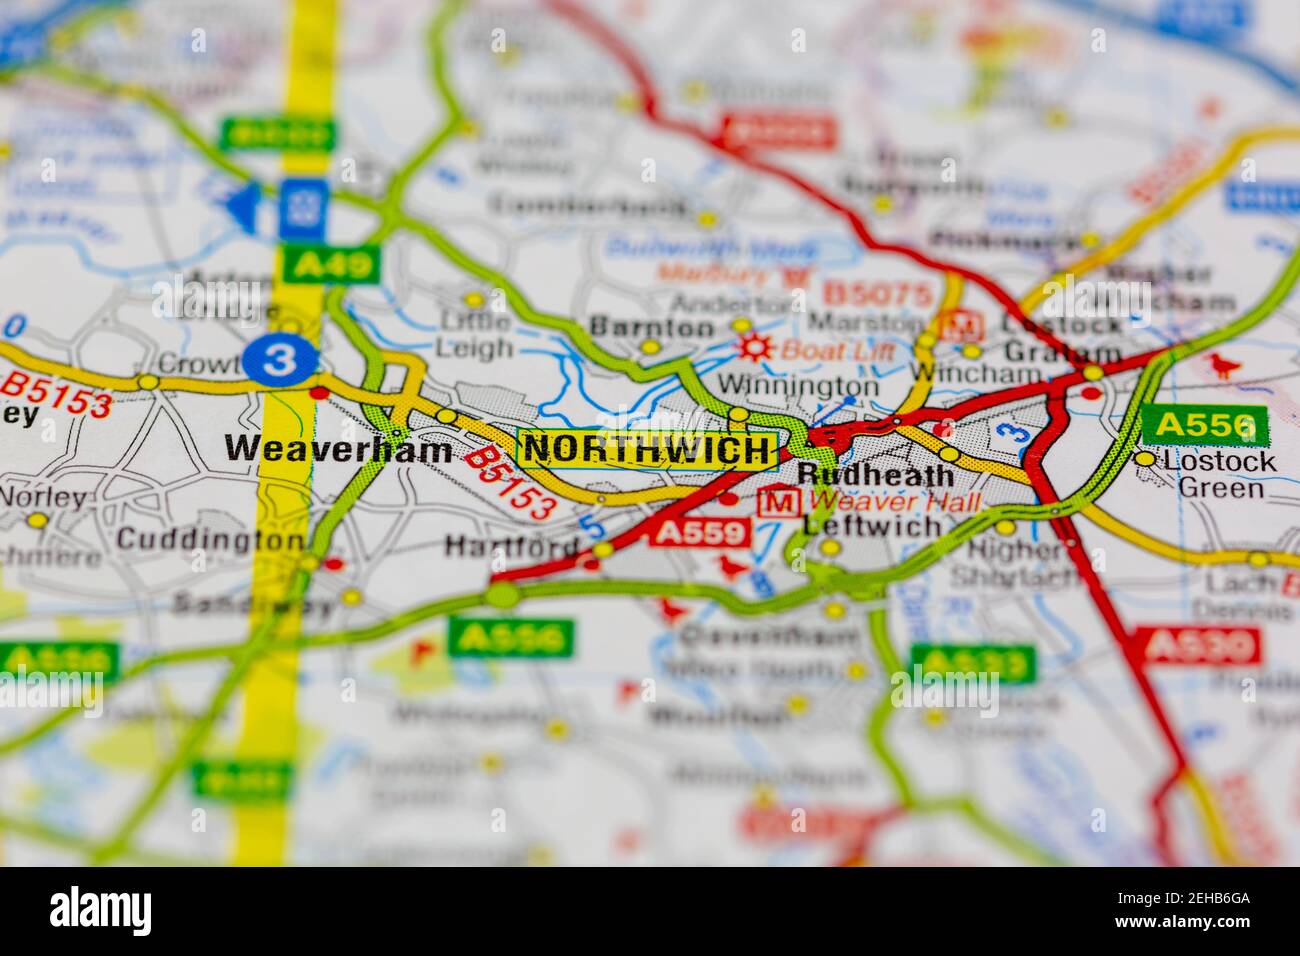 Northwich and surrounding areas shown on a road map or Geography map Stock Photo